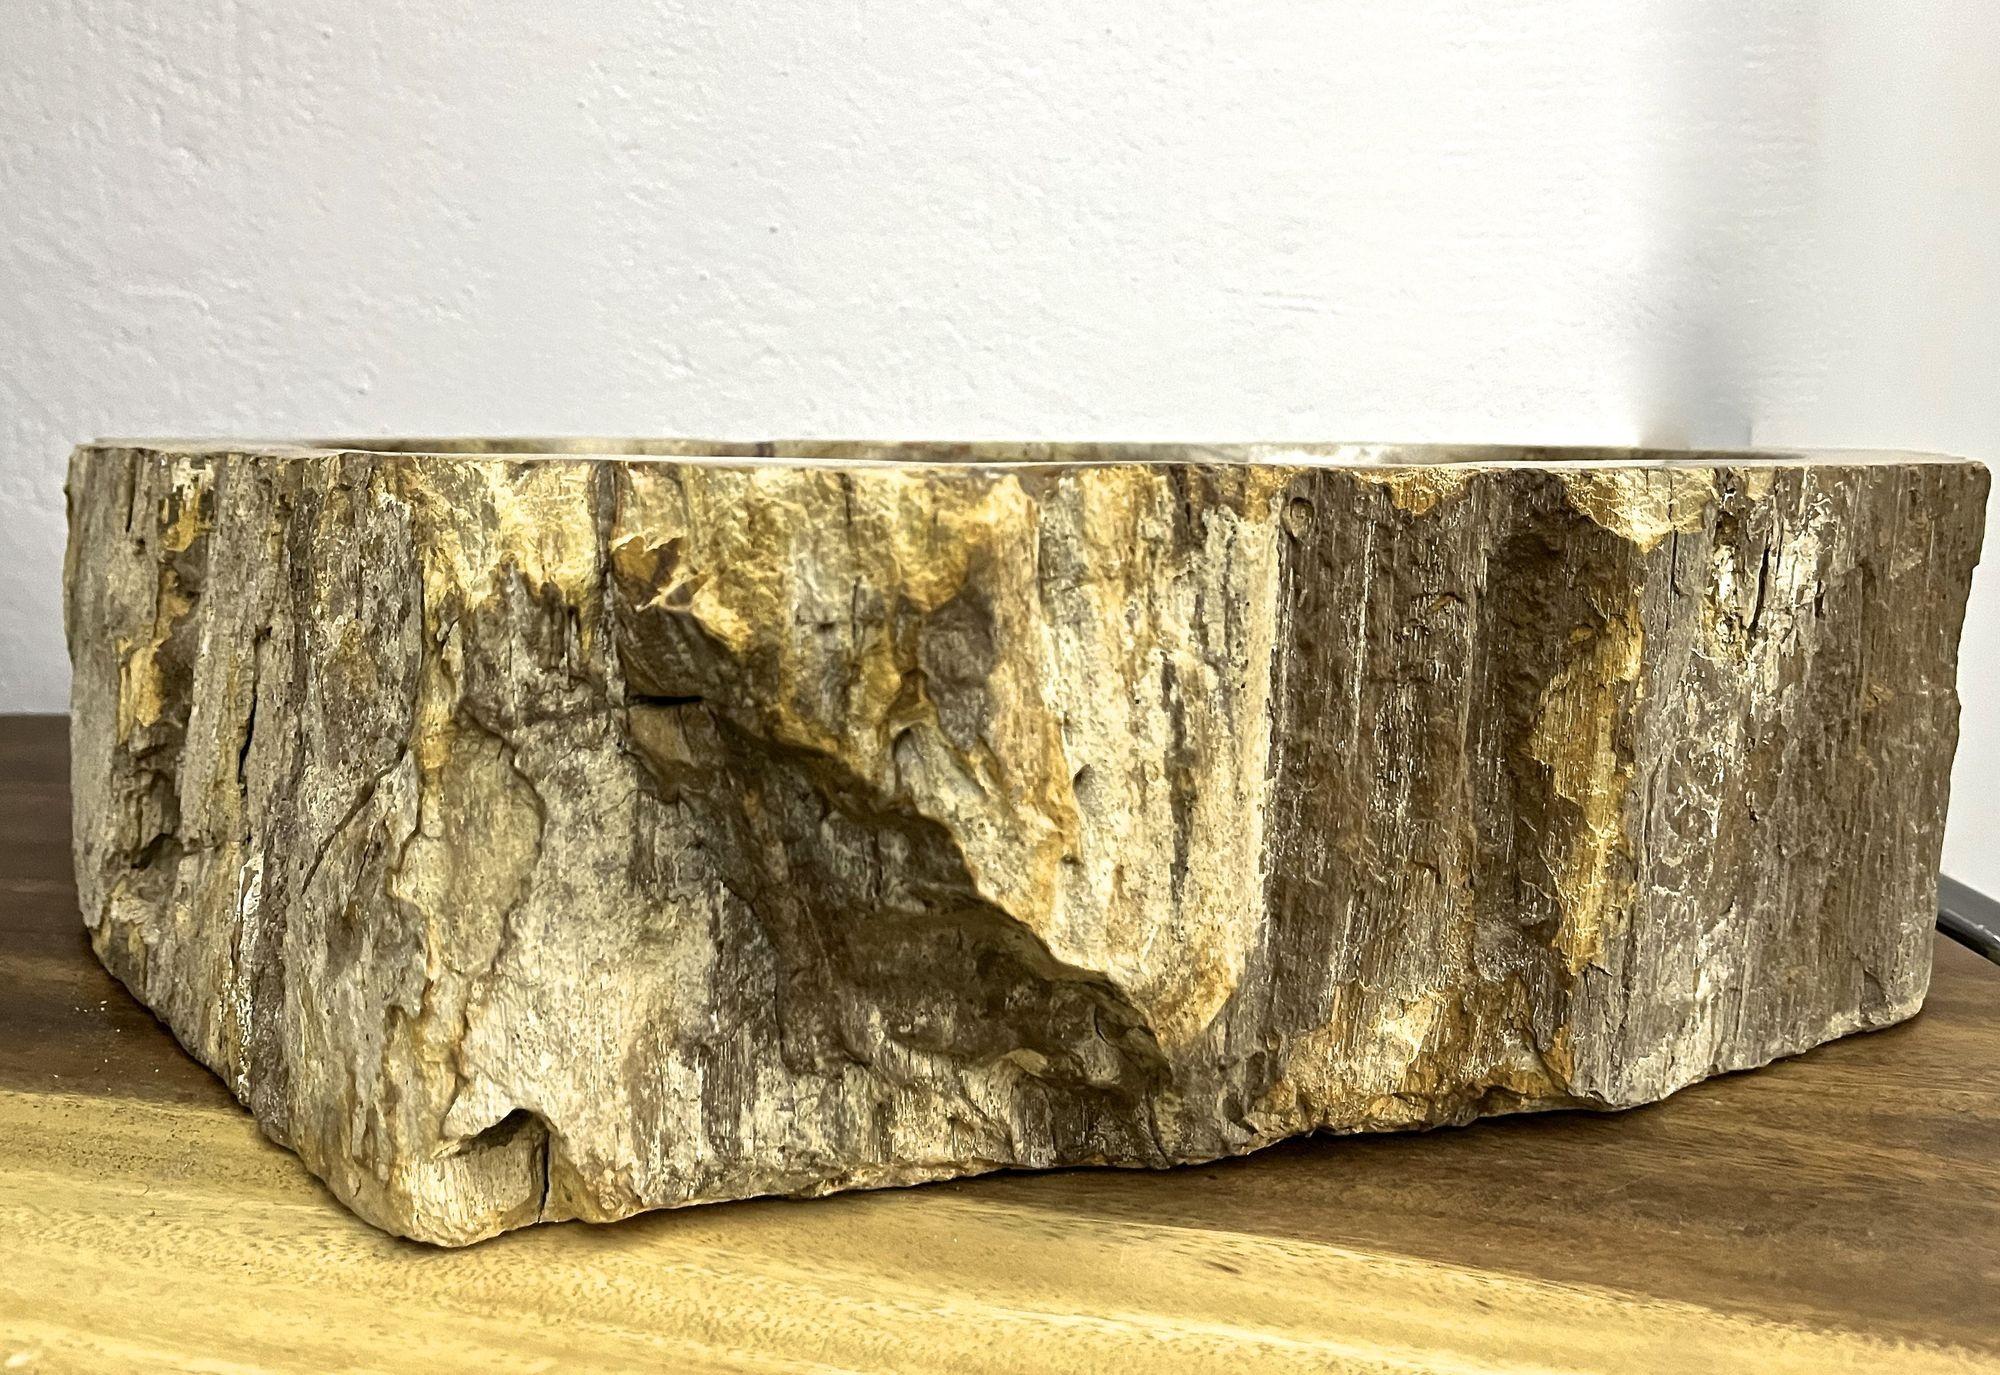 One of a kind Petrified wood sink in absolute top quality. This organic modern sink impresses with a fantastic natural shape and beautiful colors of different beige, brown, yellow and grey tones. The inside of the sink shows a polished surface with